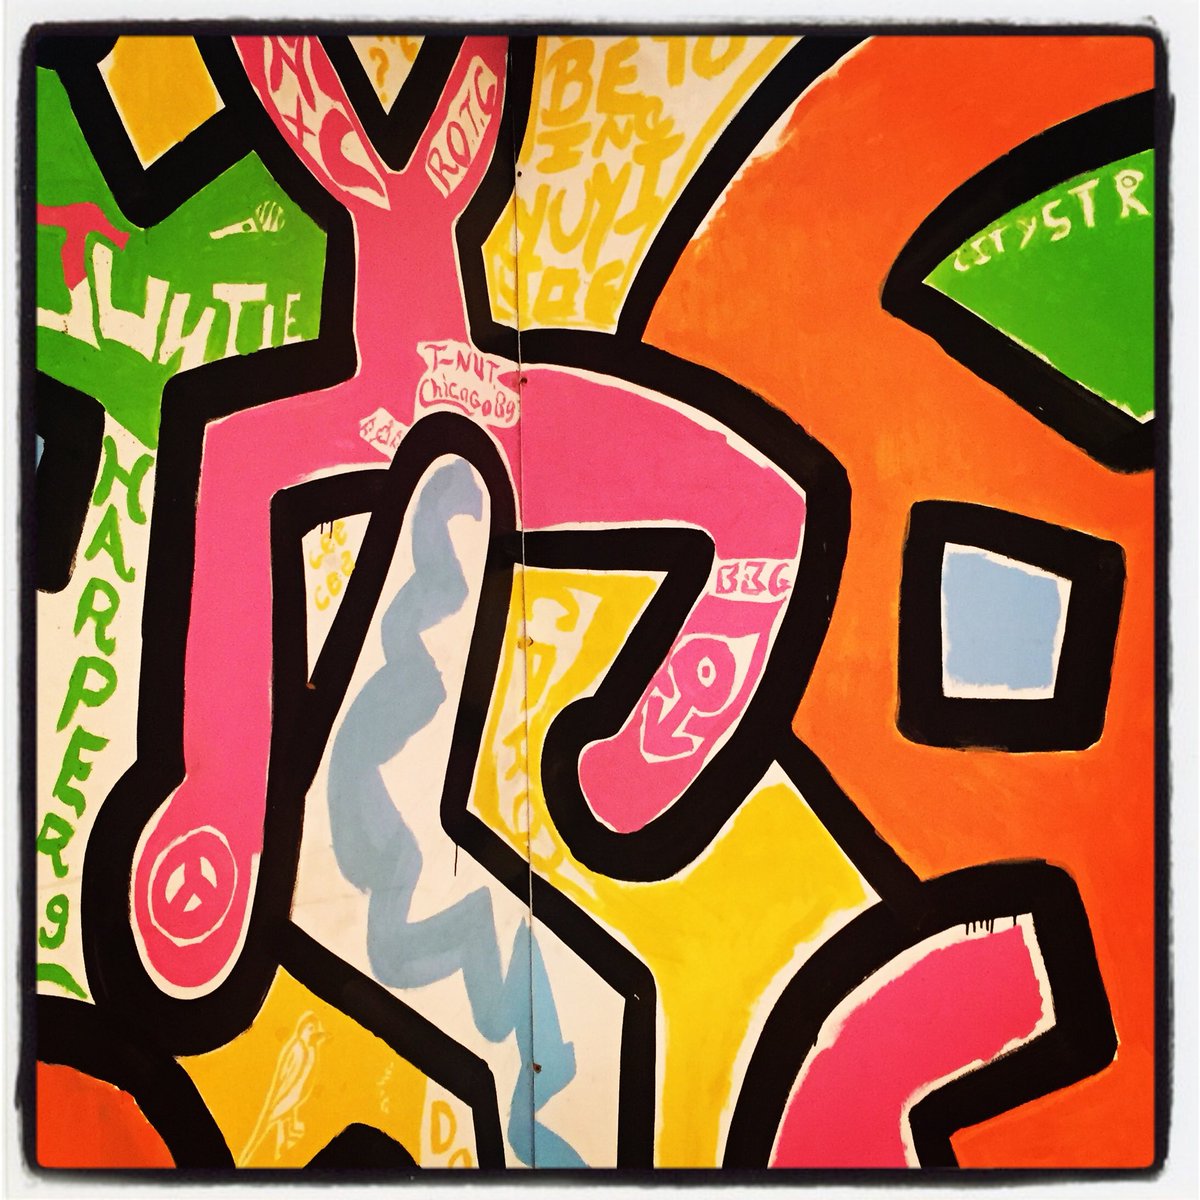 Keith Haring: The Chicago Mural. 